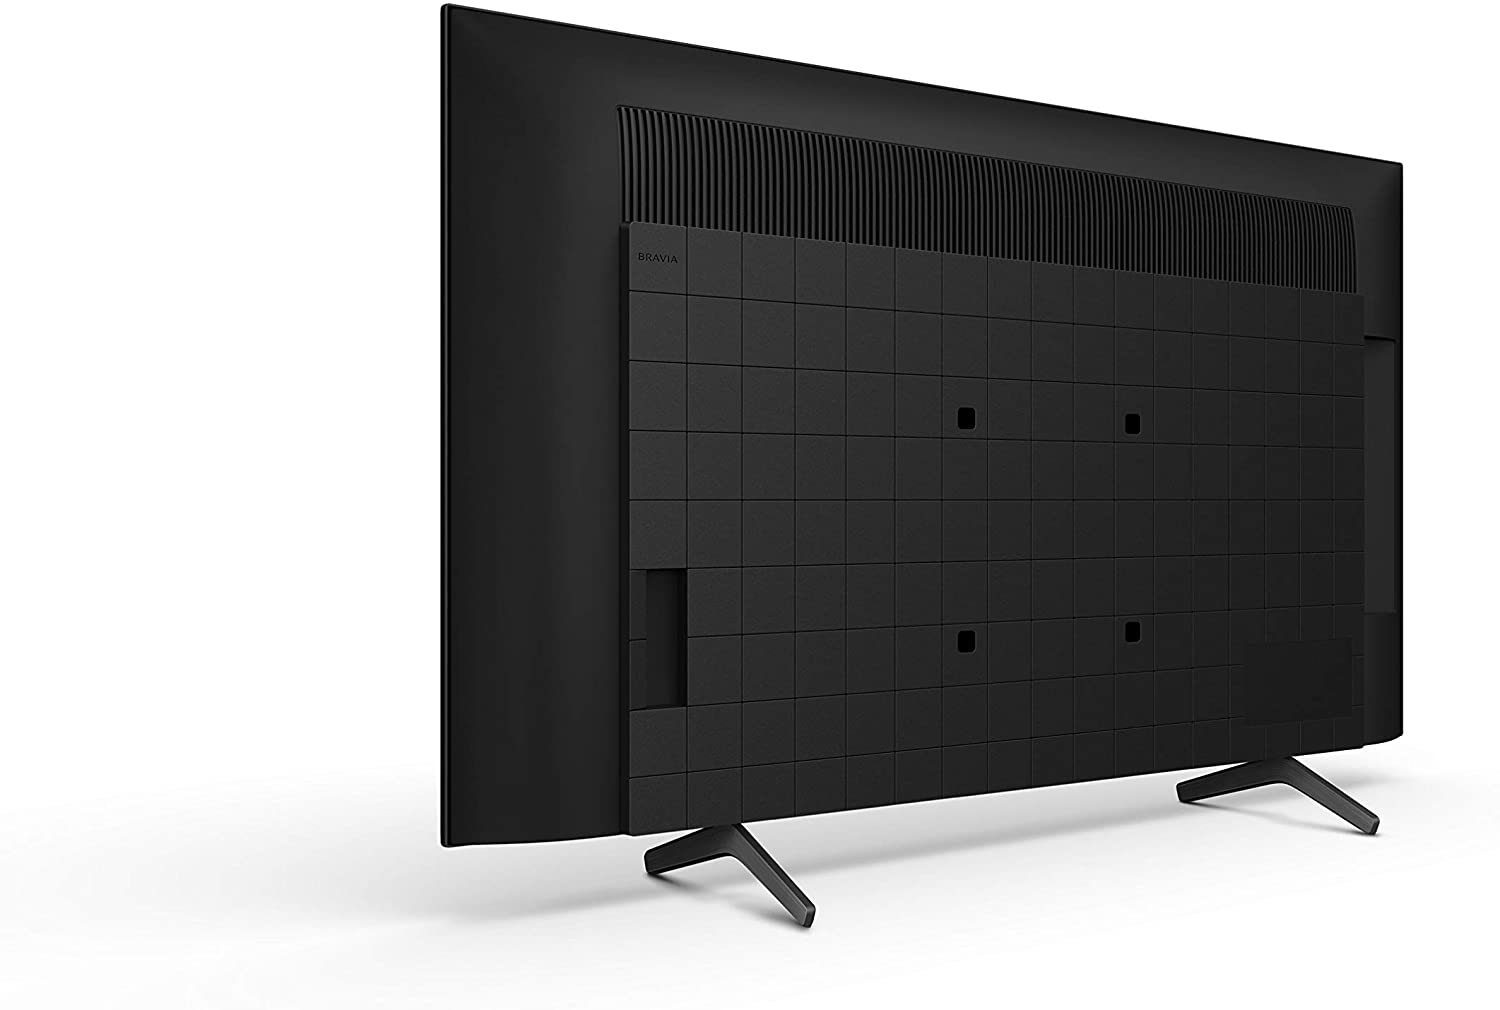 Sony X80J 43 Inch TV: 4K Ultra HD LED Smart Google TV with Dolby Vision HDR and Alexa Compatibility 